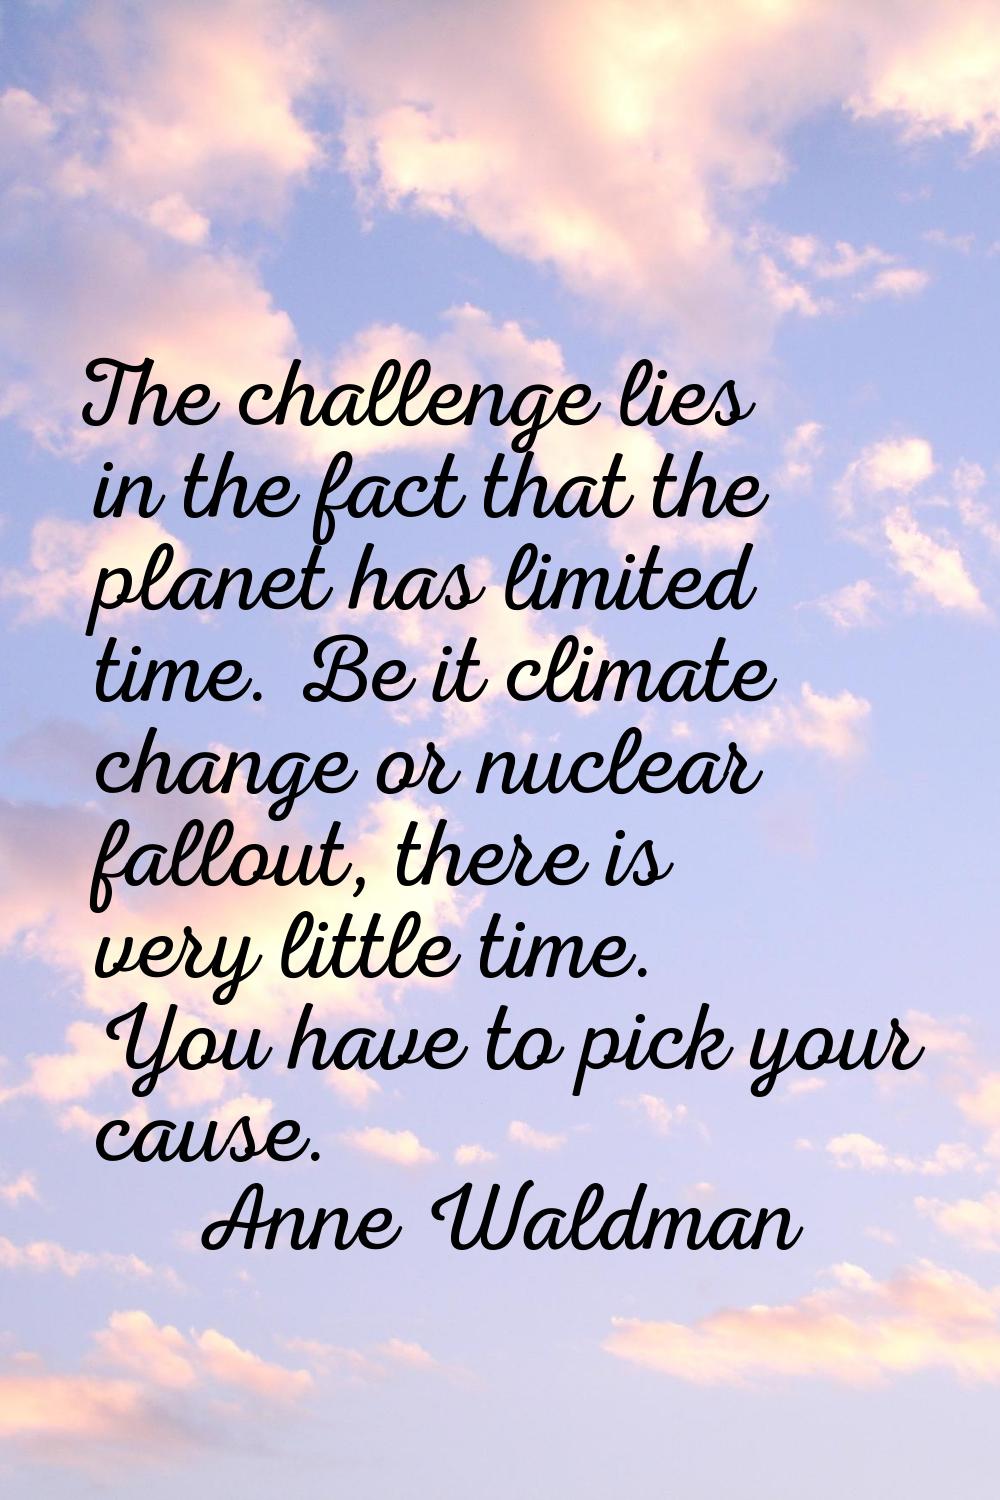 The challenge lies in the fact that the planet has limited time. Be it climate change or nuclear fa